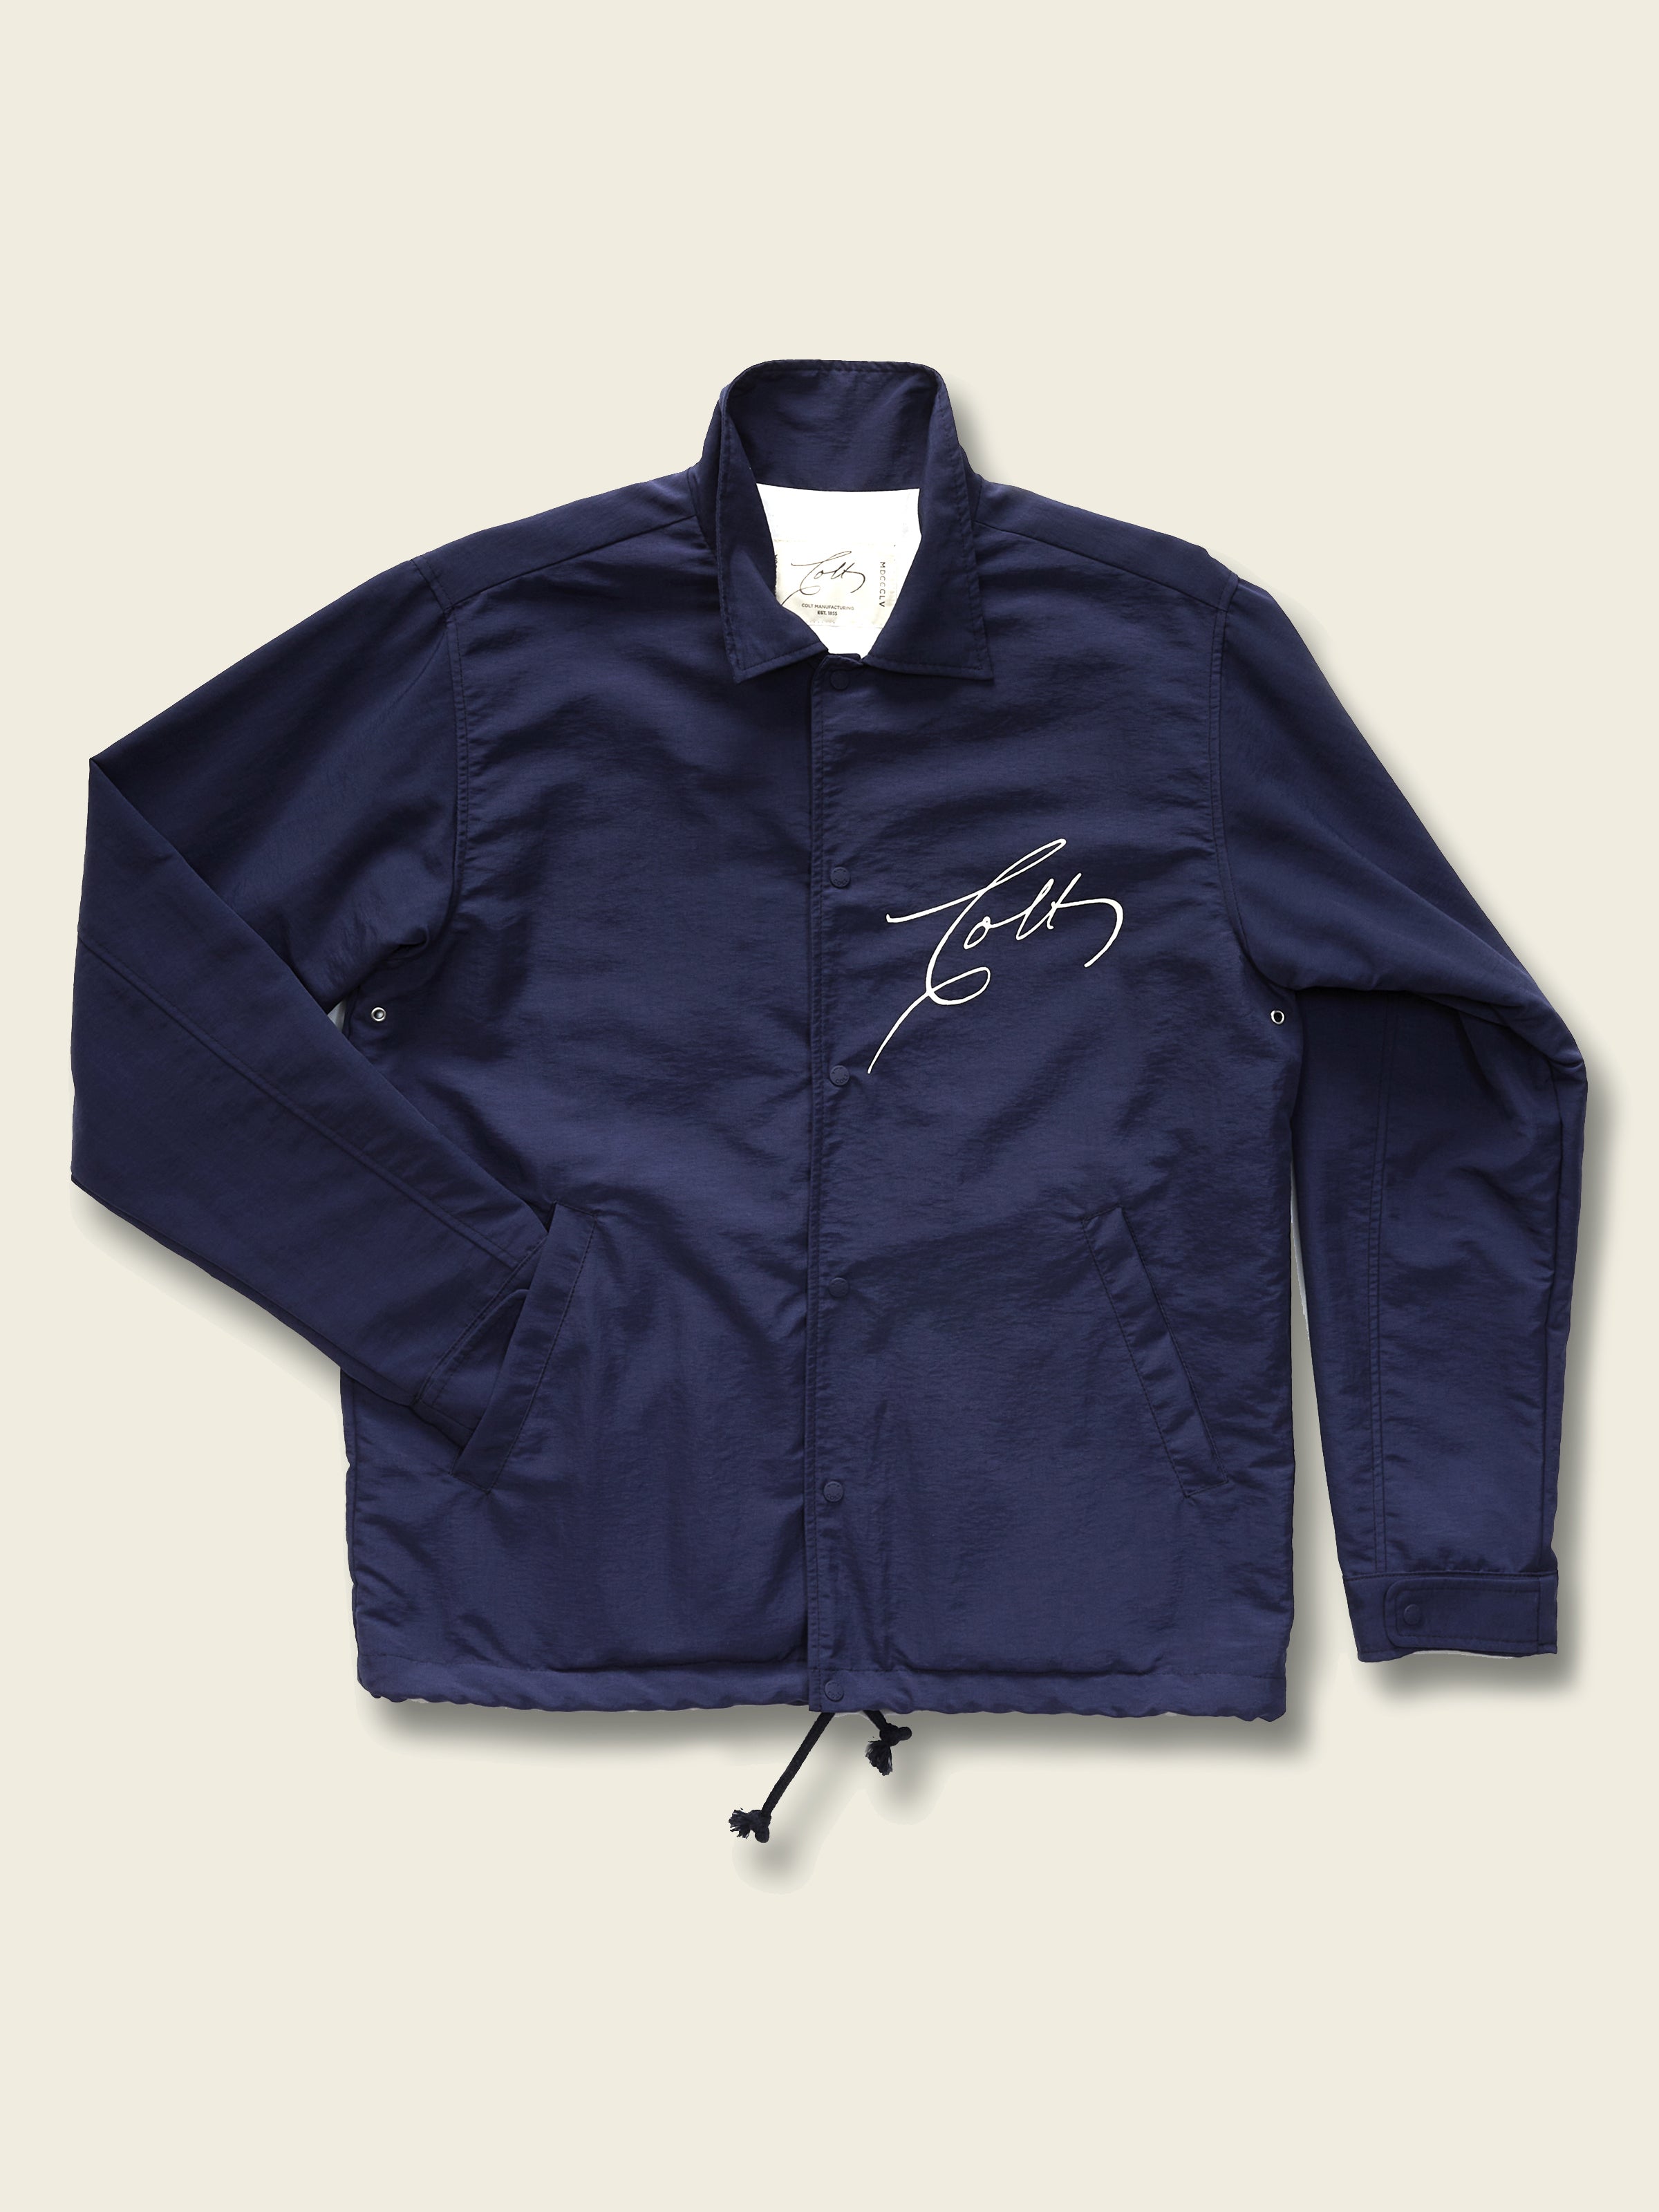 Signature Coaches Jacket in Navy